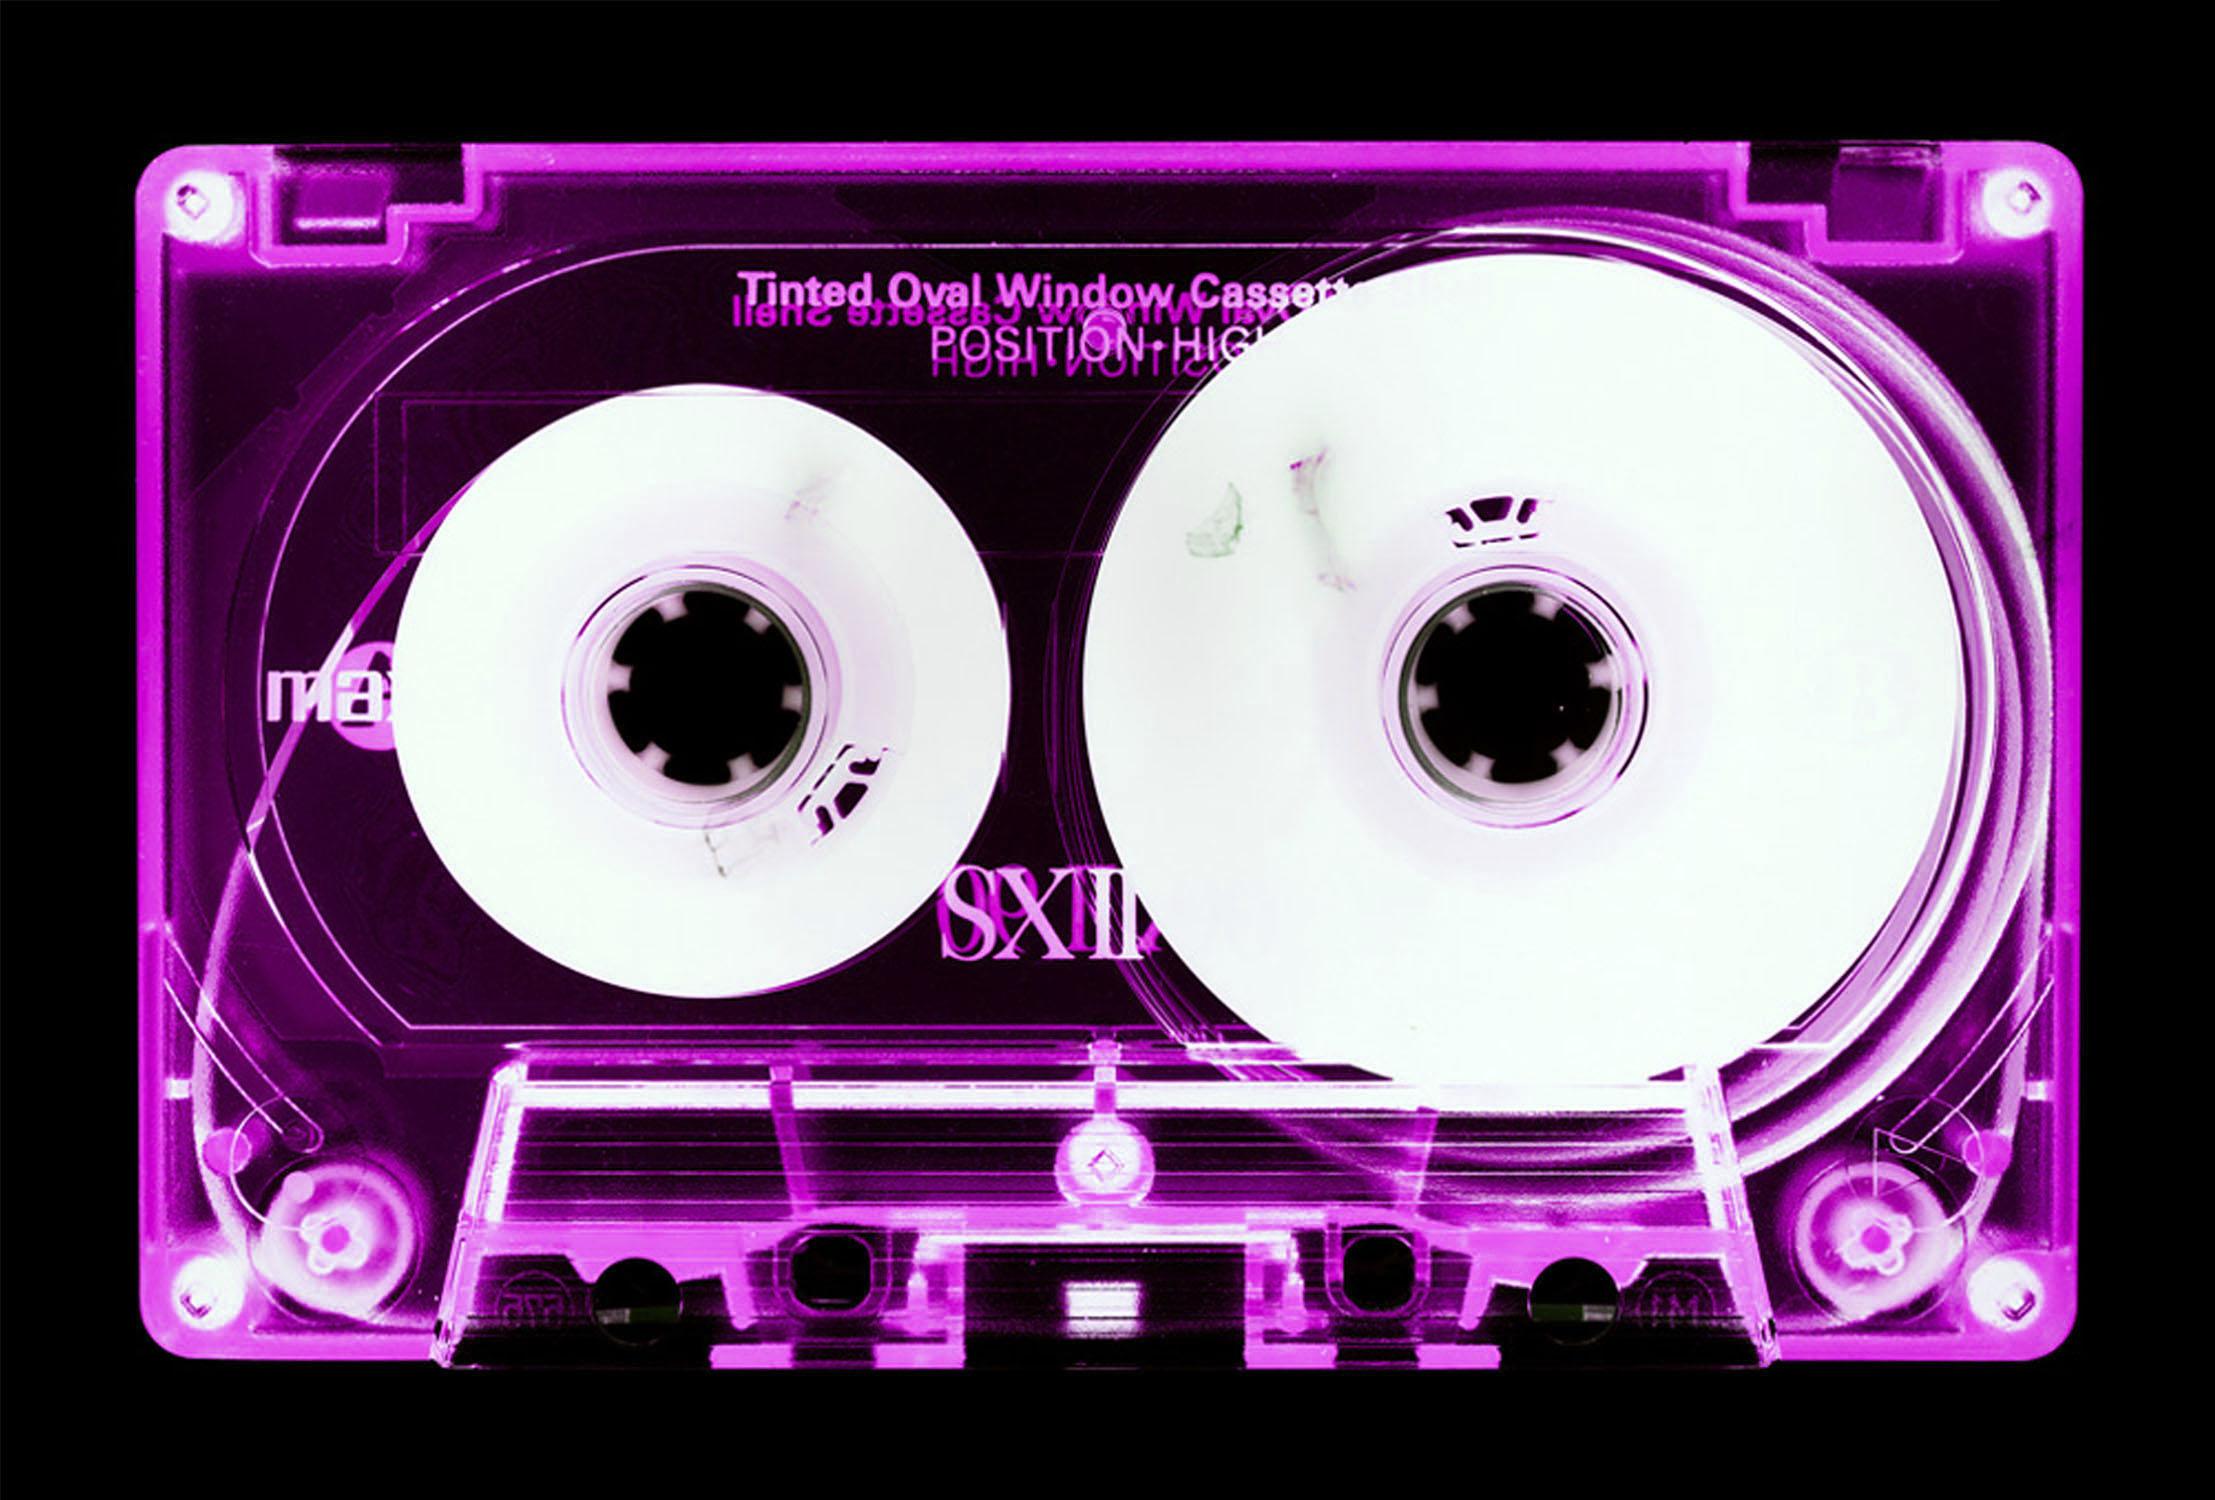 Tape Collection, Pink Tinted Cassette - Contemporary Pop Art Color Photography